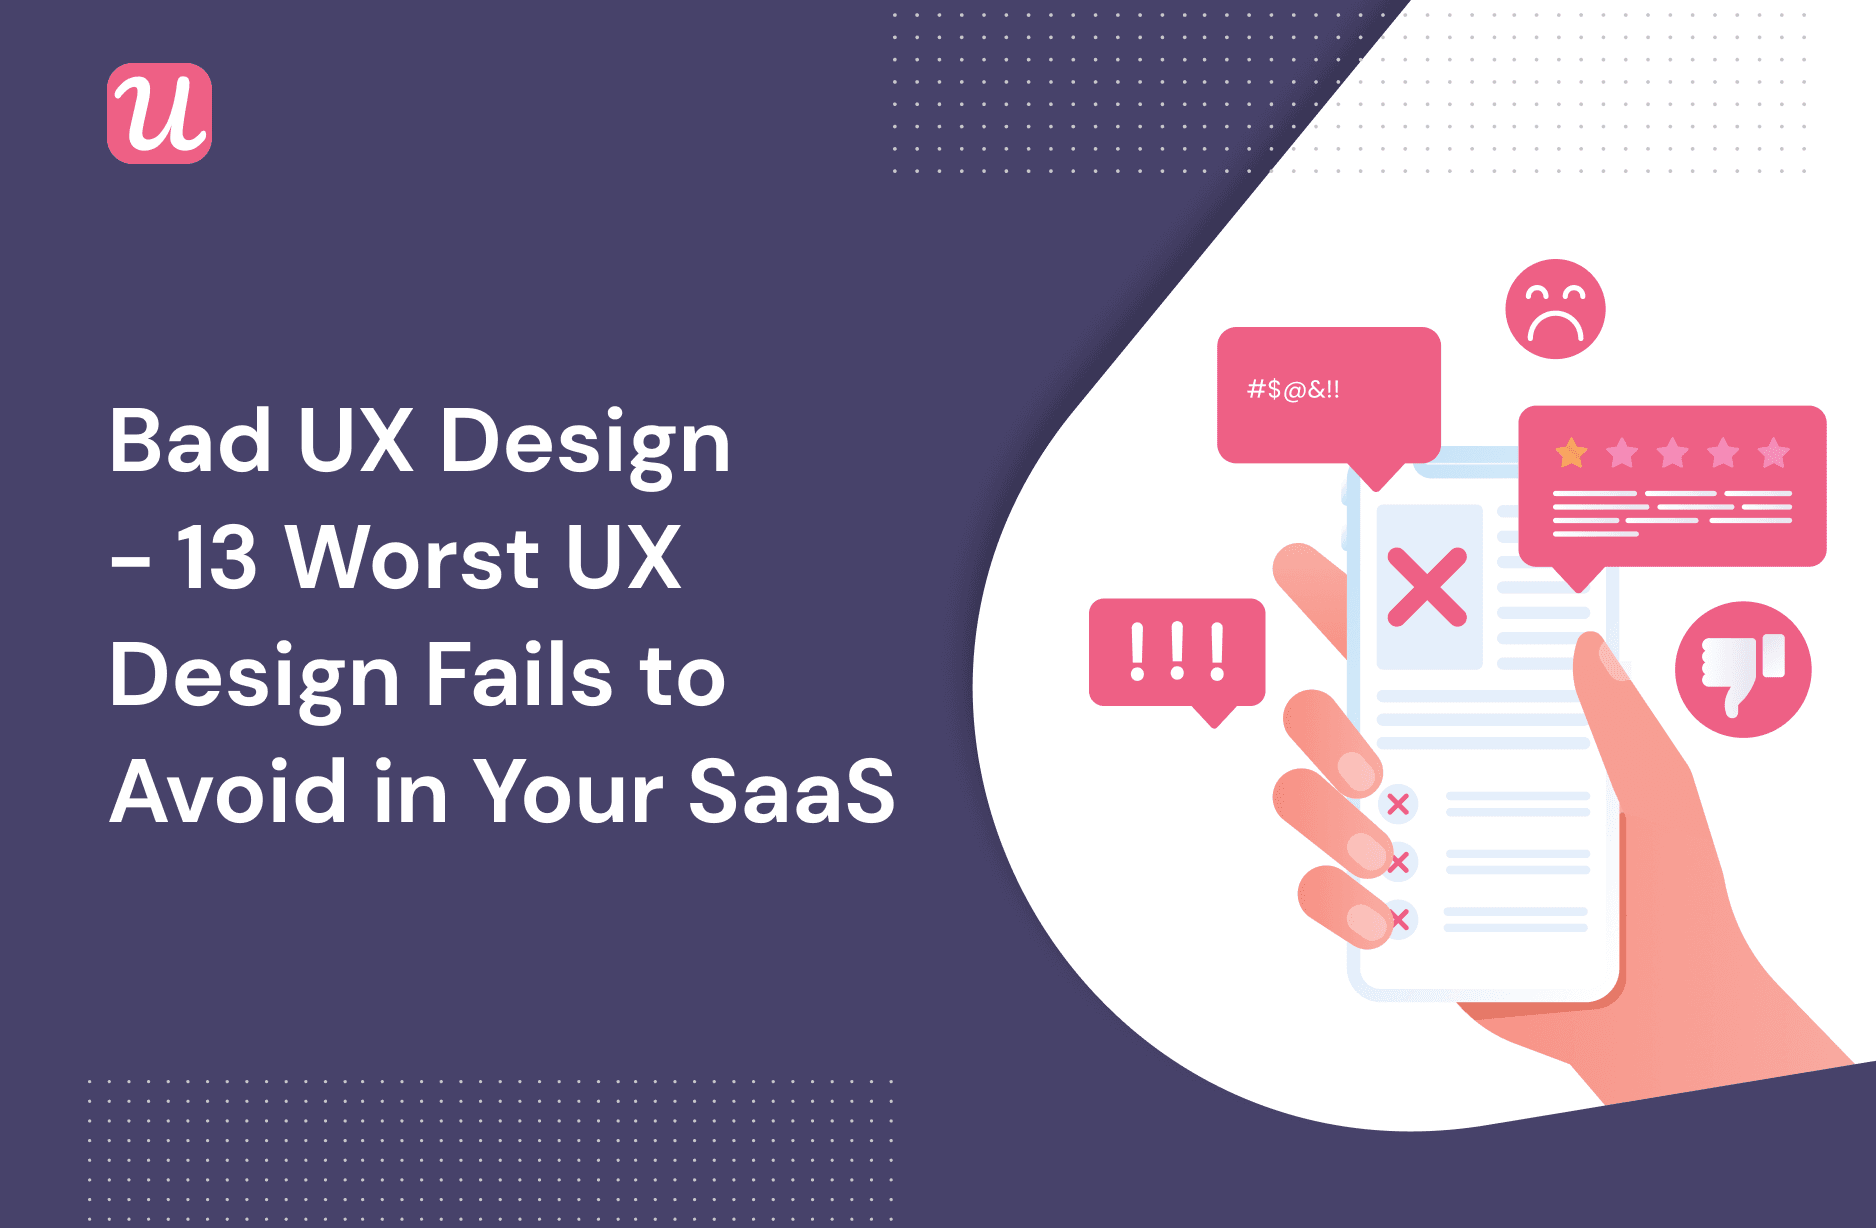 Bad UX Design - 13 Worst UX Design Fails to Avoid in Your SaaS